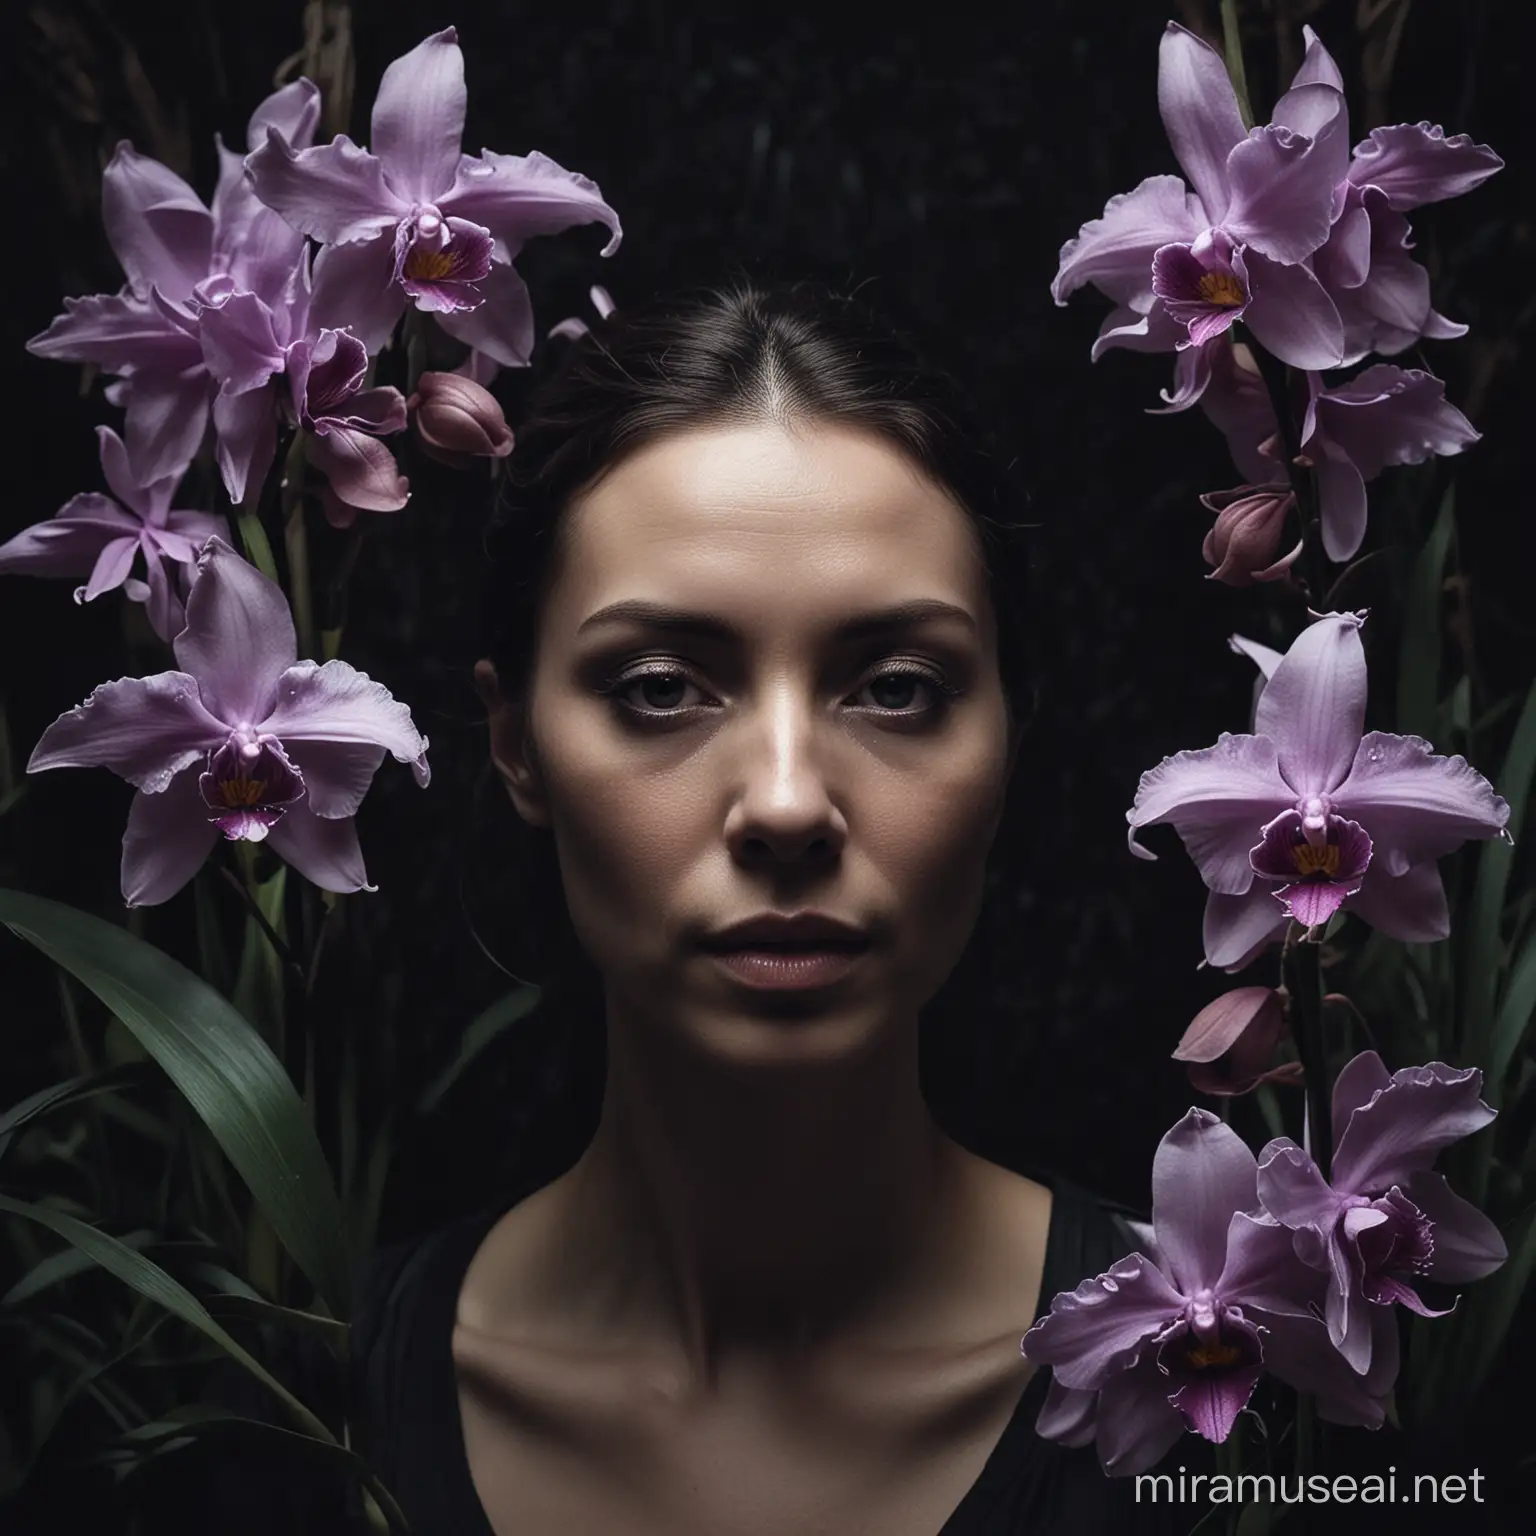 Womans Enigmatic Portrait with Orchids in a Mysterious Setting